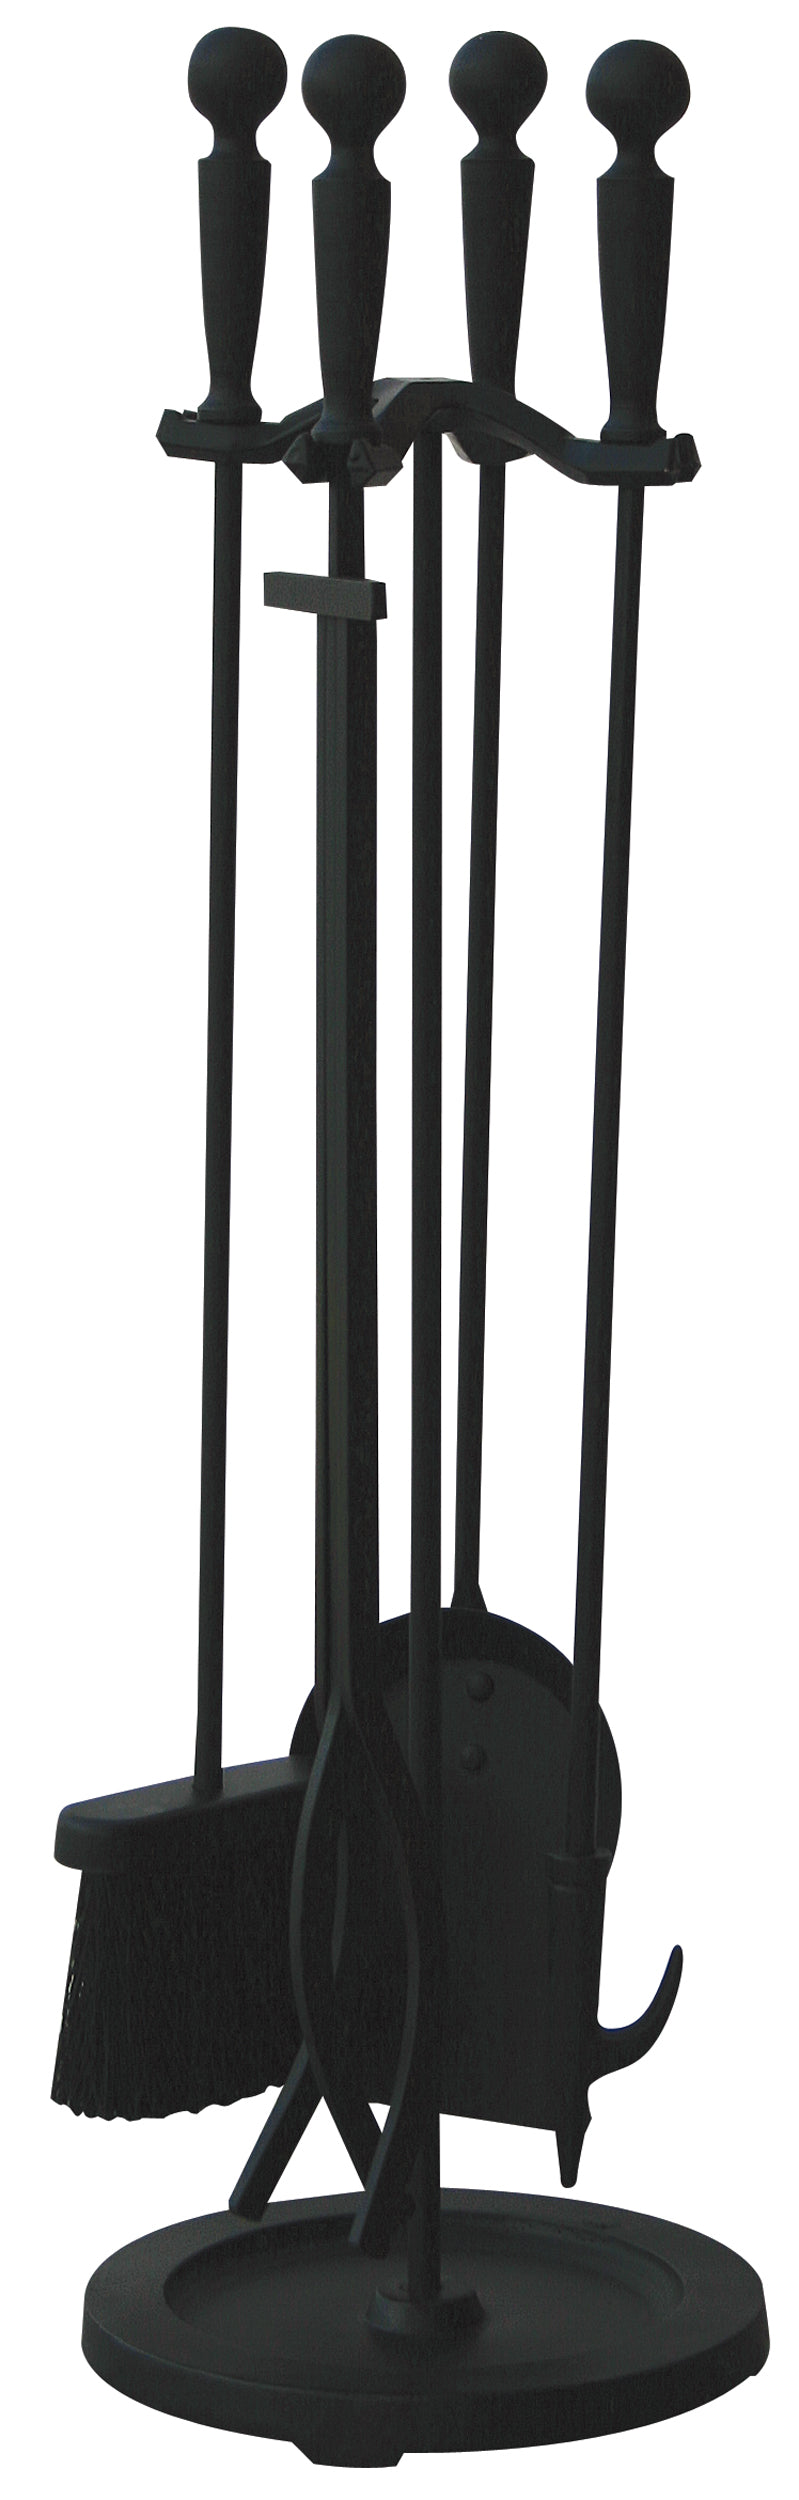 UniFlame 5 Piece Black Finish Fireset with Ball Handles